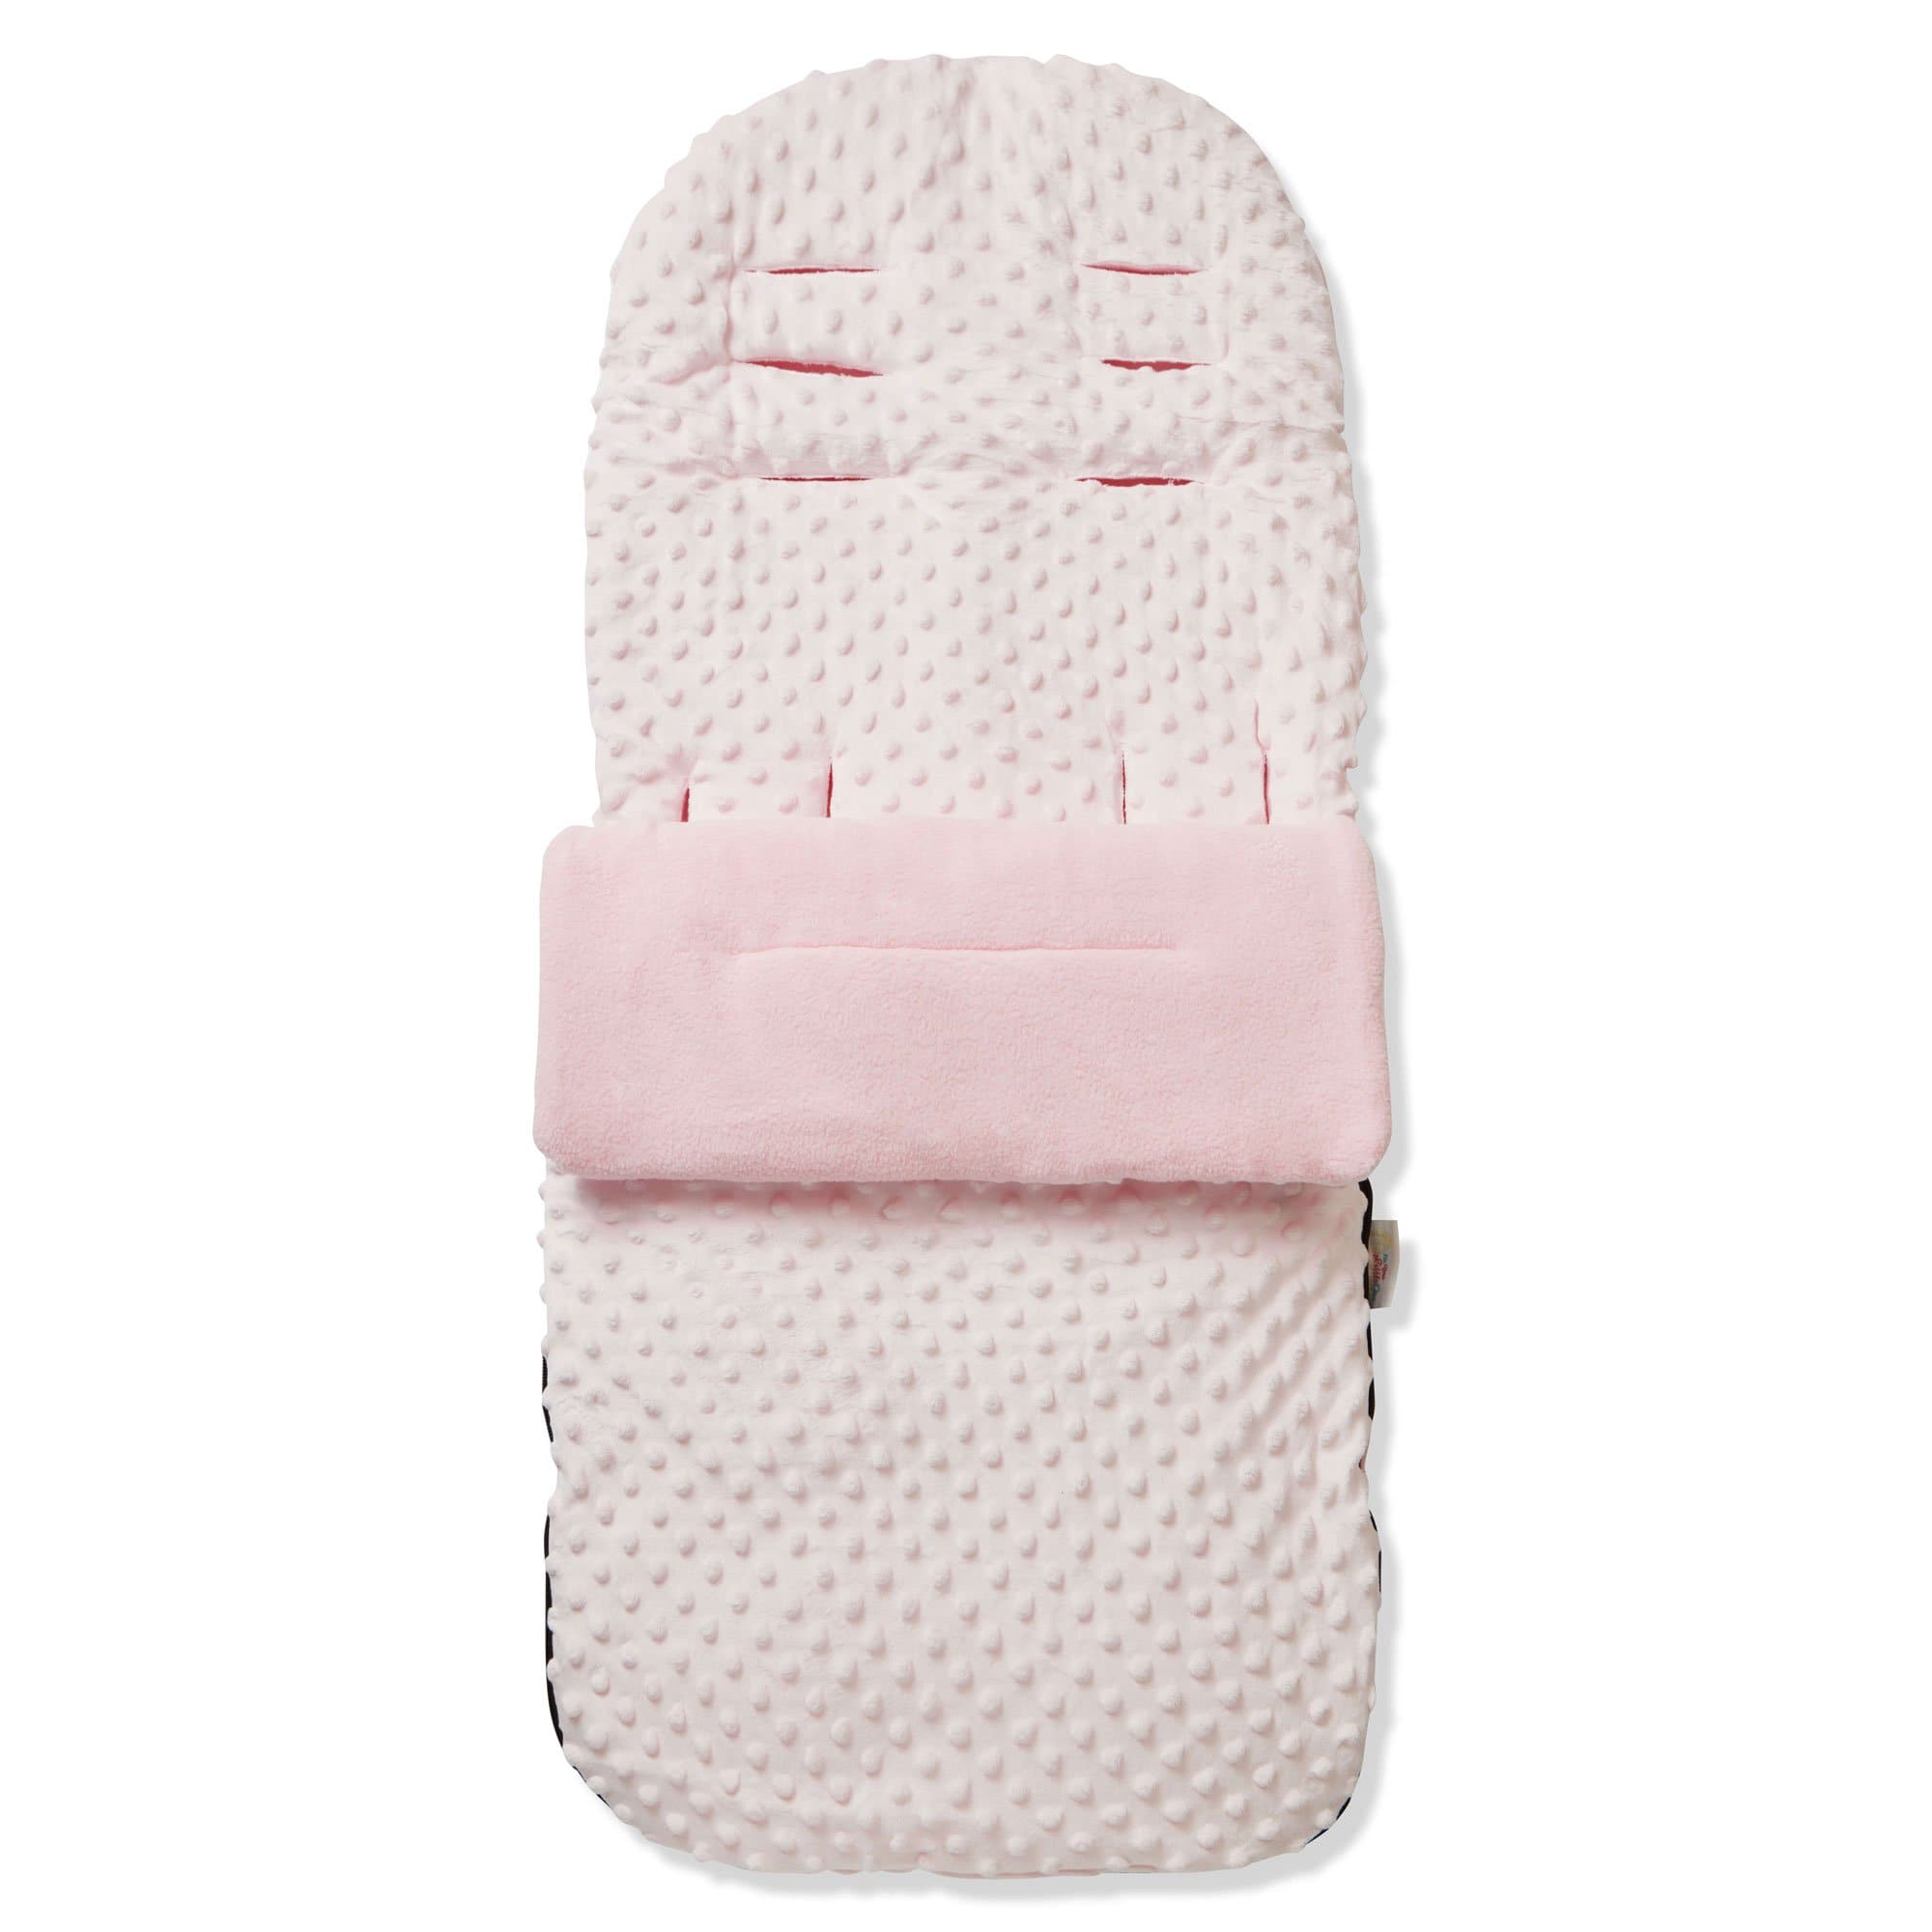 Dimple Footmuff / Cosy Toes Compatible with Graco - Pink / Fits All Models | For Your Little One